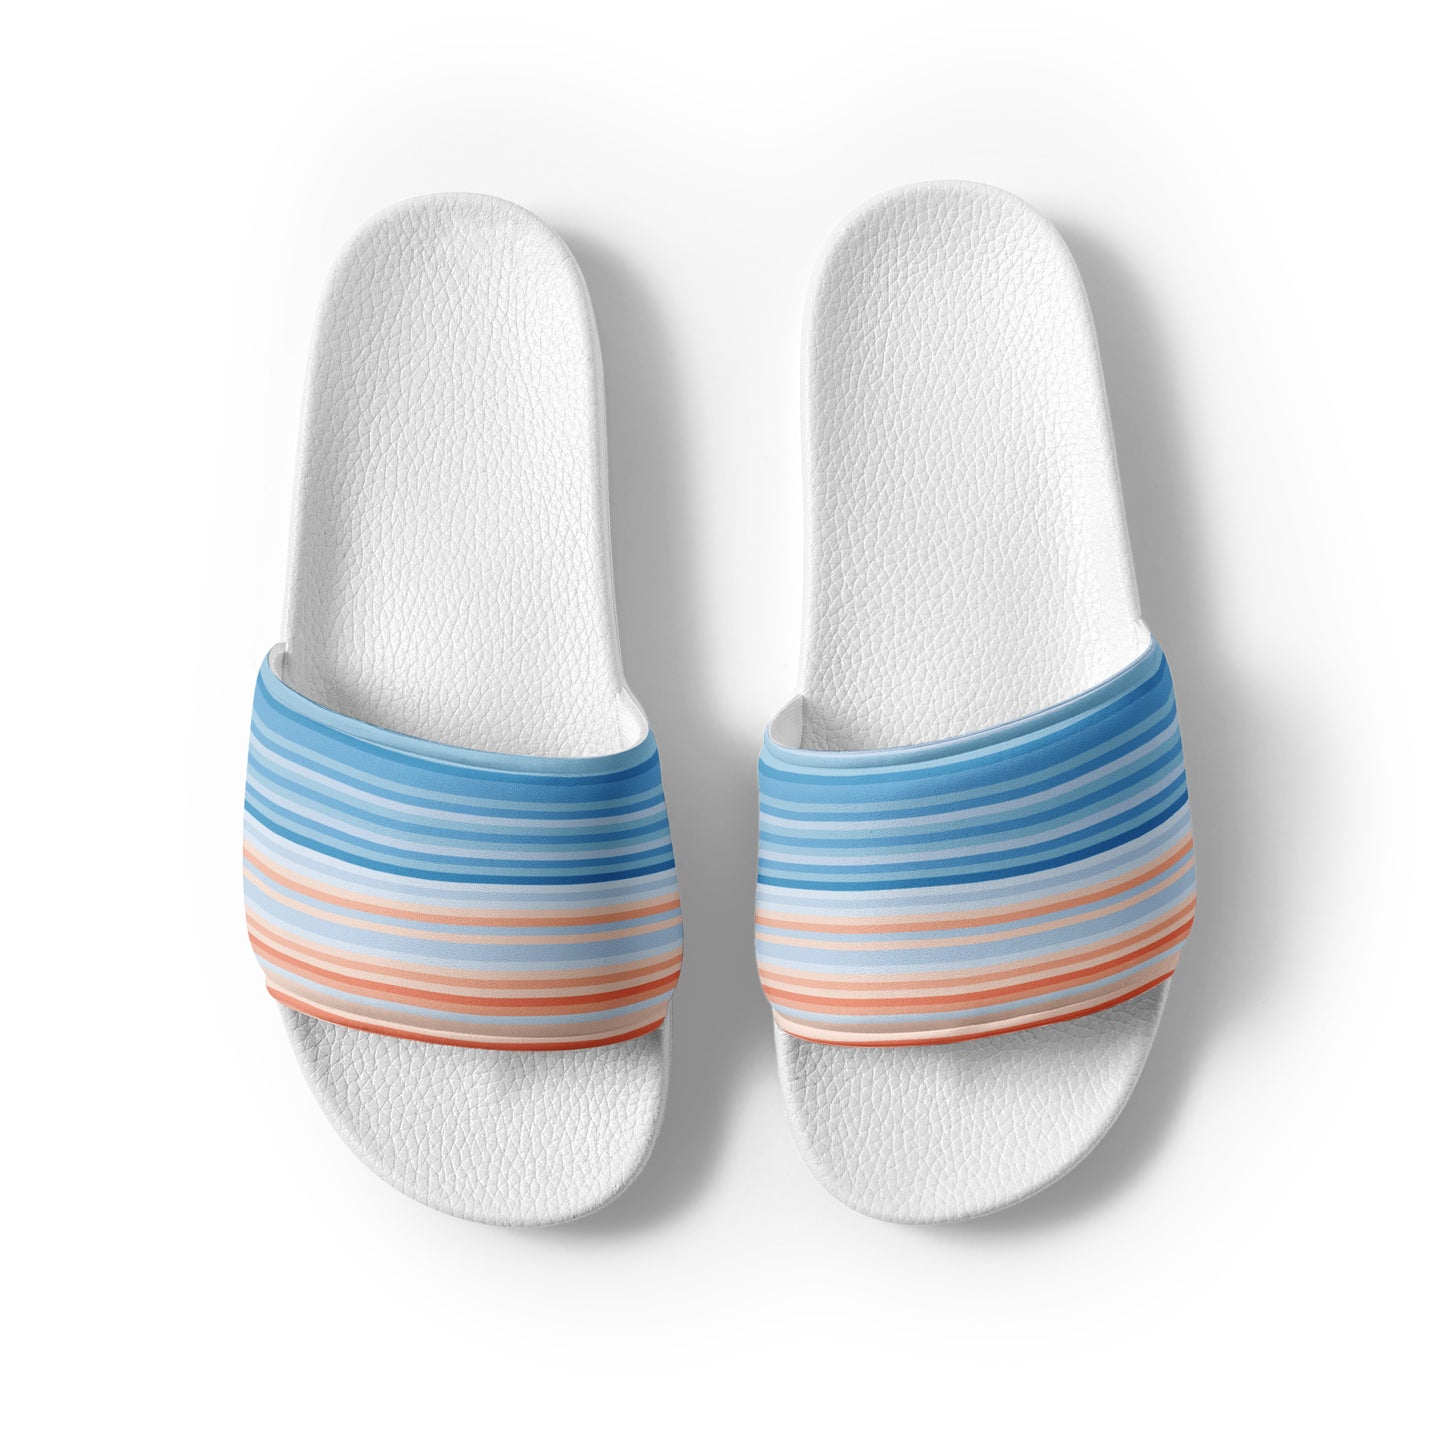 Climate Change Global Warming Stripes - Sustainably Made Women's slides